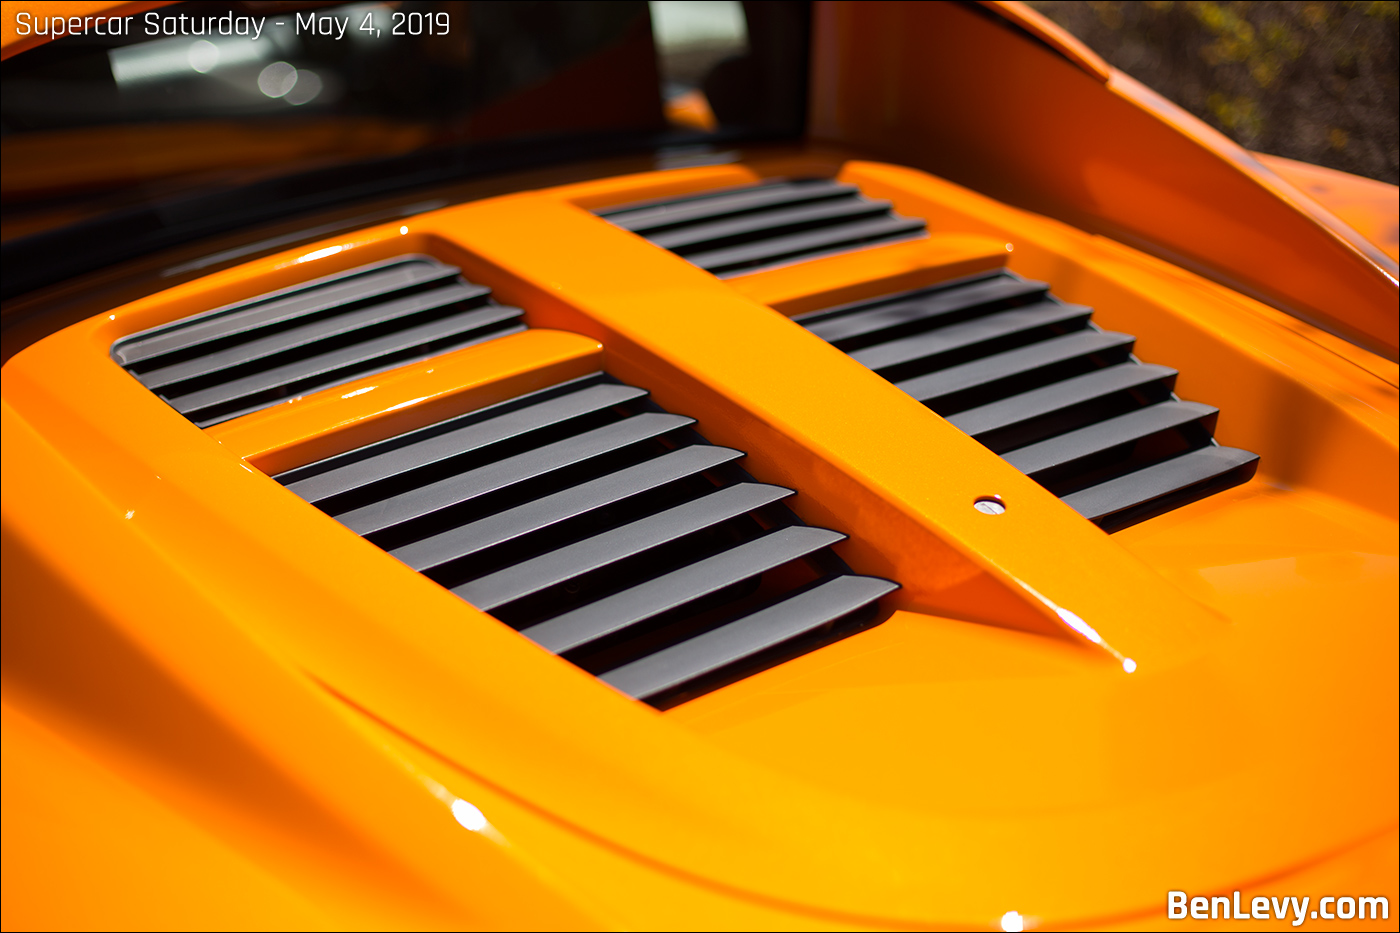 Engine cover vents on Lotus Elise